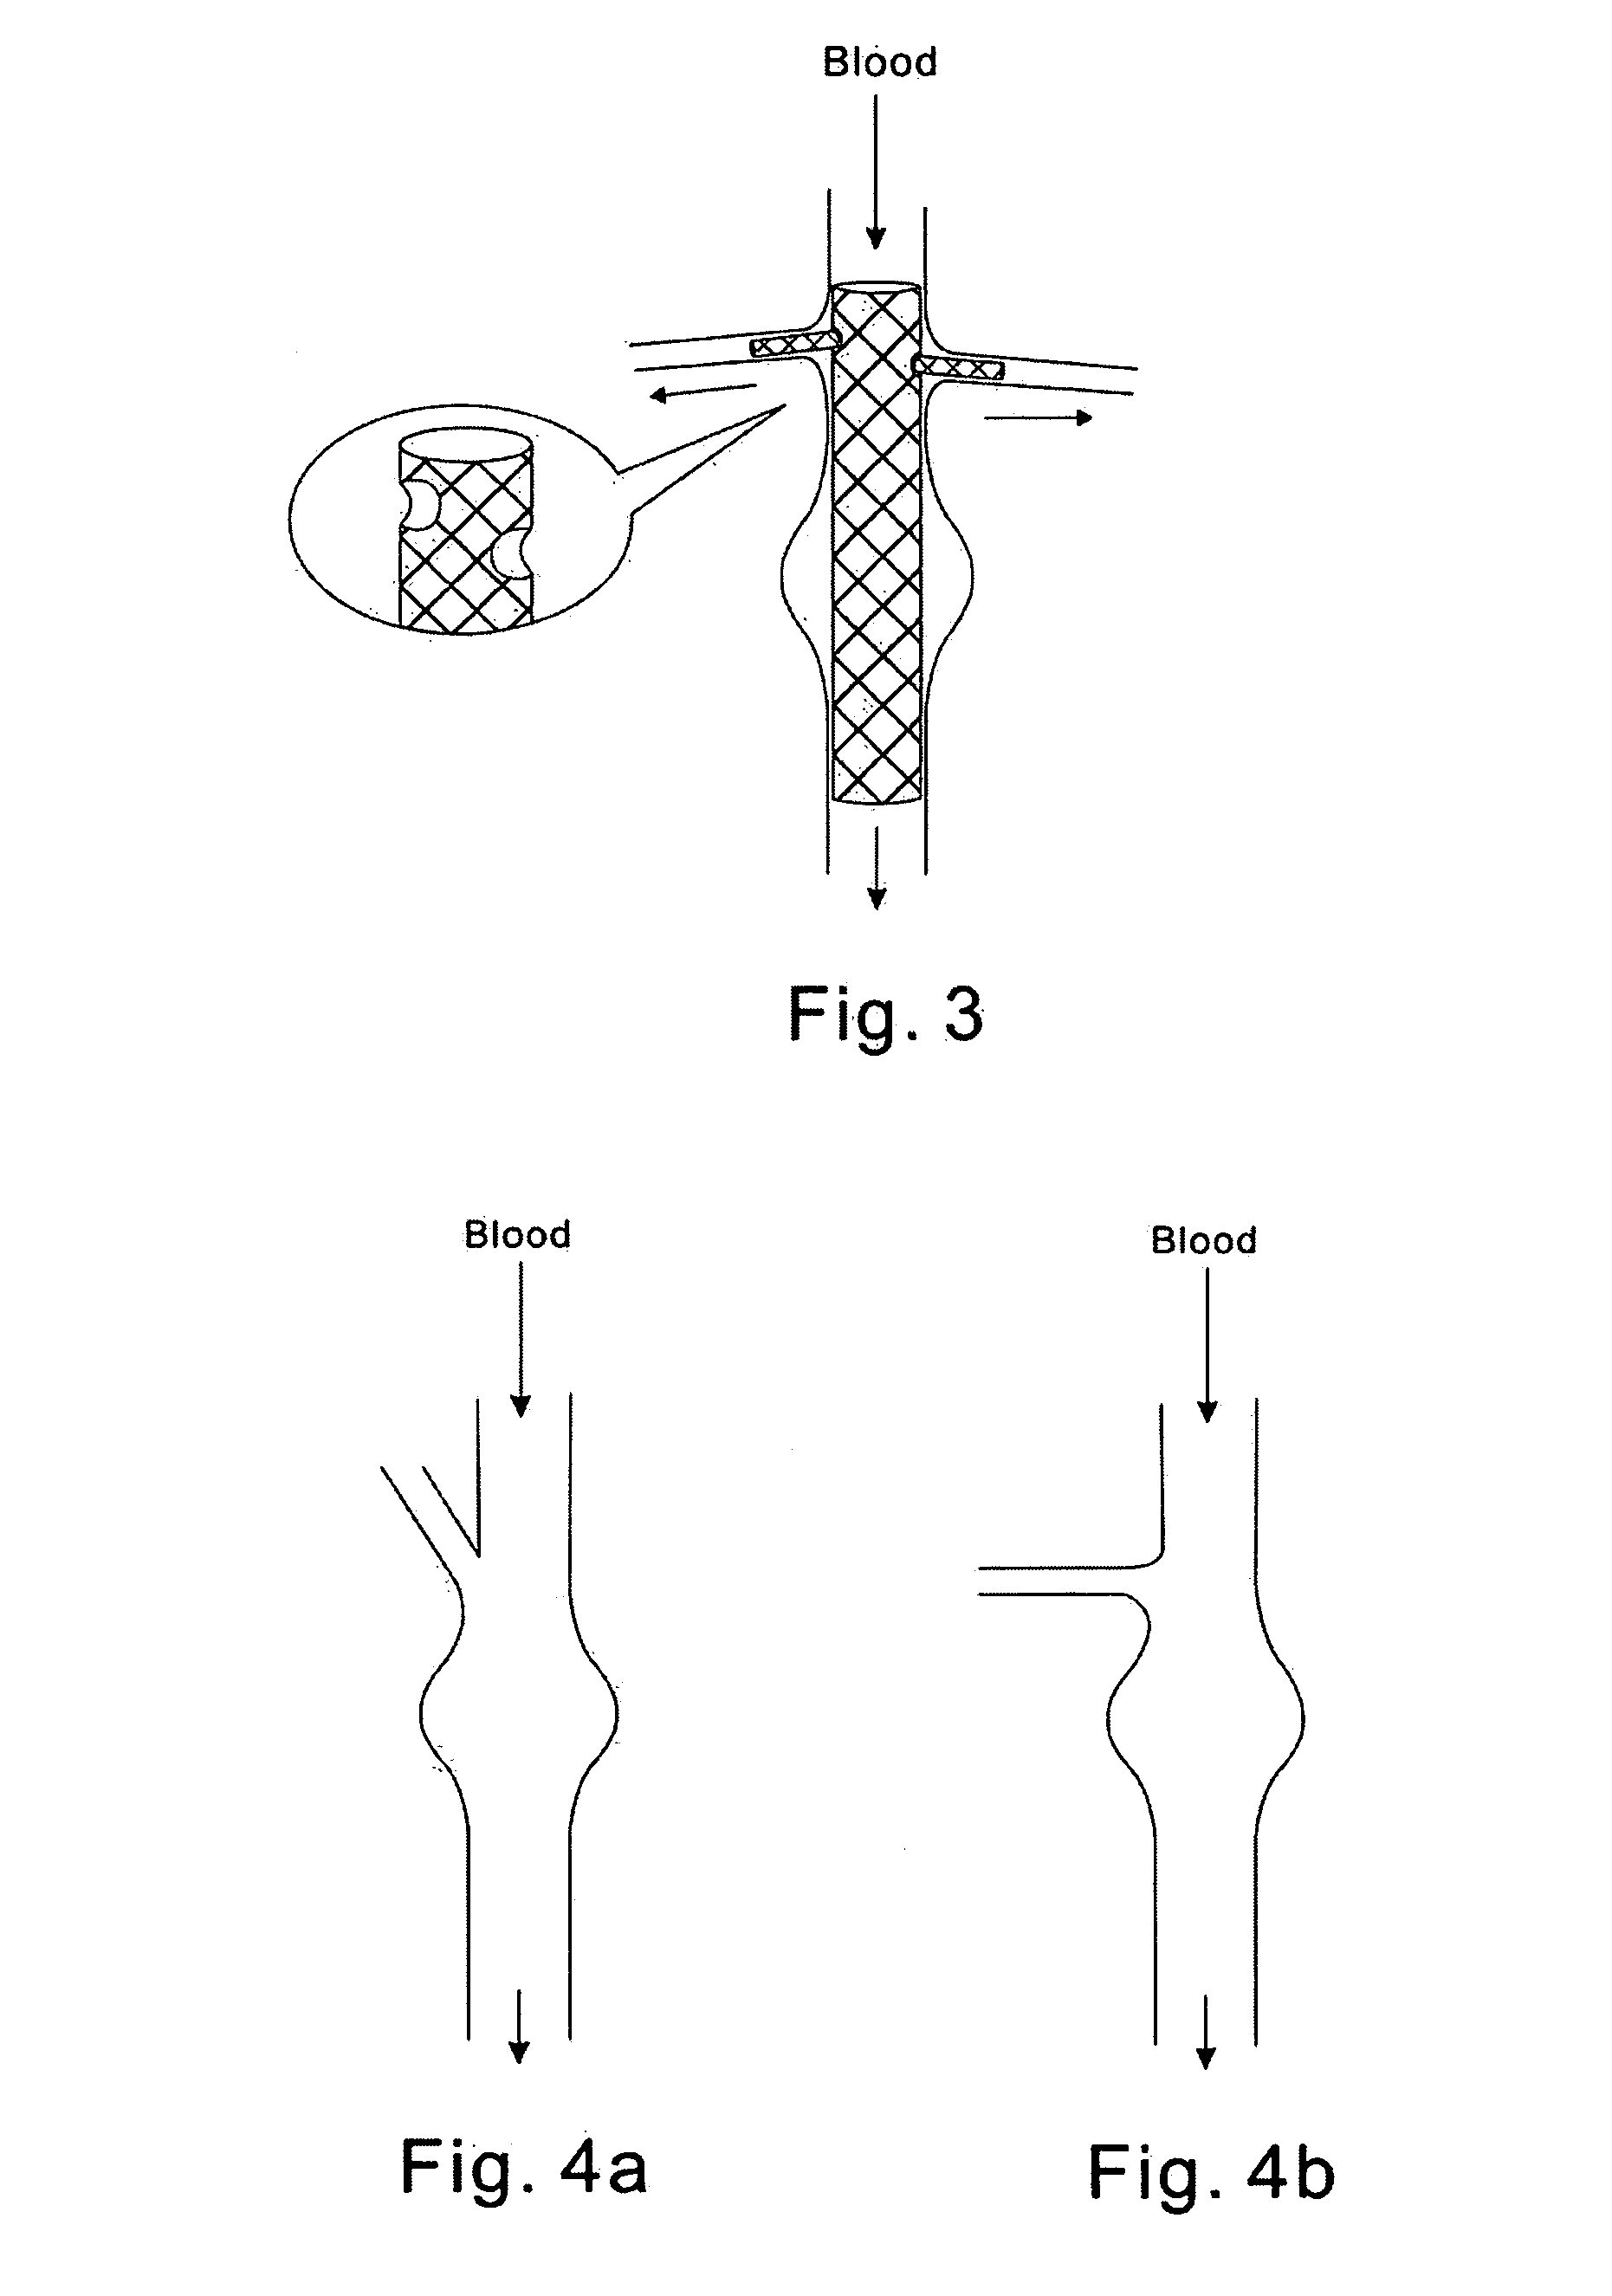 Modular stent graft and delivery system